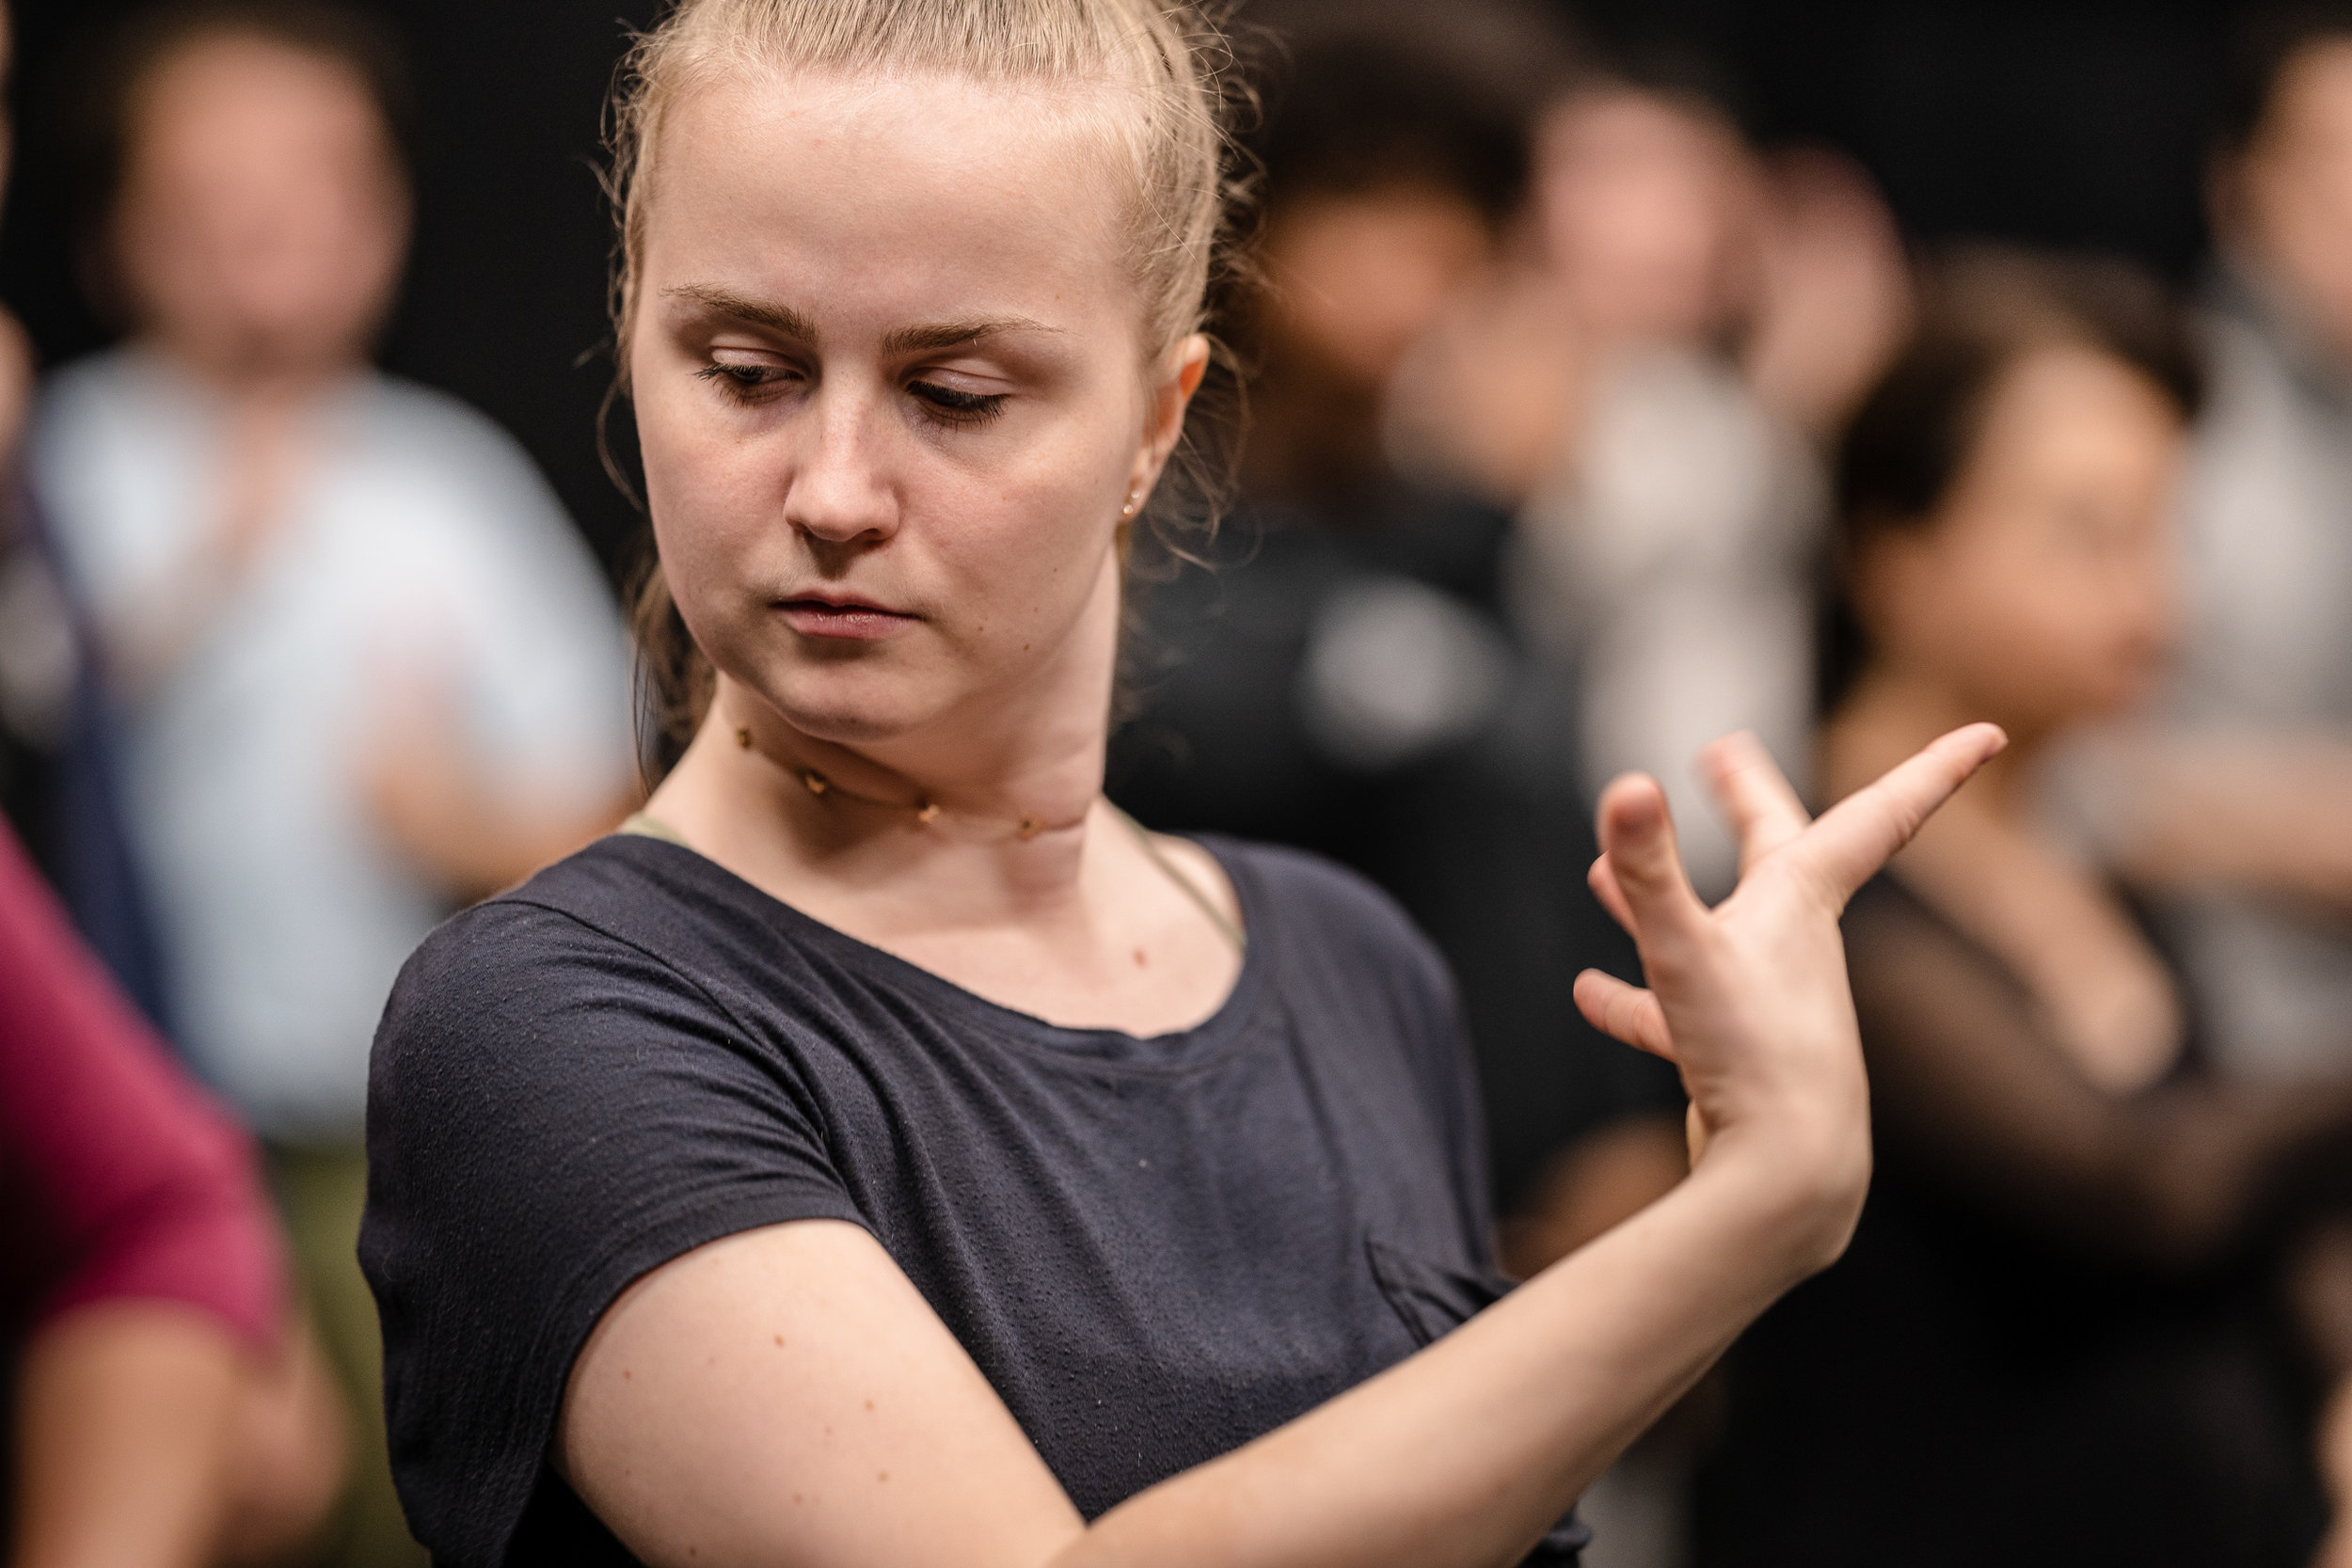  Josefin Östevik, 21, an SMC Musical Theatre major from Västeras, Sweden, rehearses dance choreography for the SMC production of Flamenco Macbeth at the SMC Studio Stage on Thursday, March 21, 2019. Flamenco Macbeth is an adaptation of Shakespeare’s 